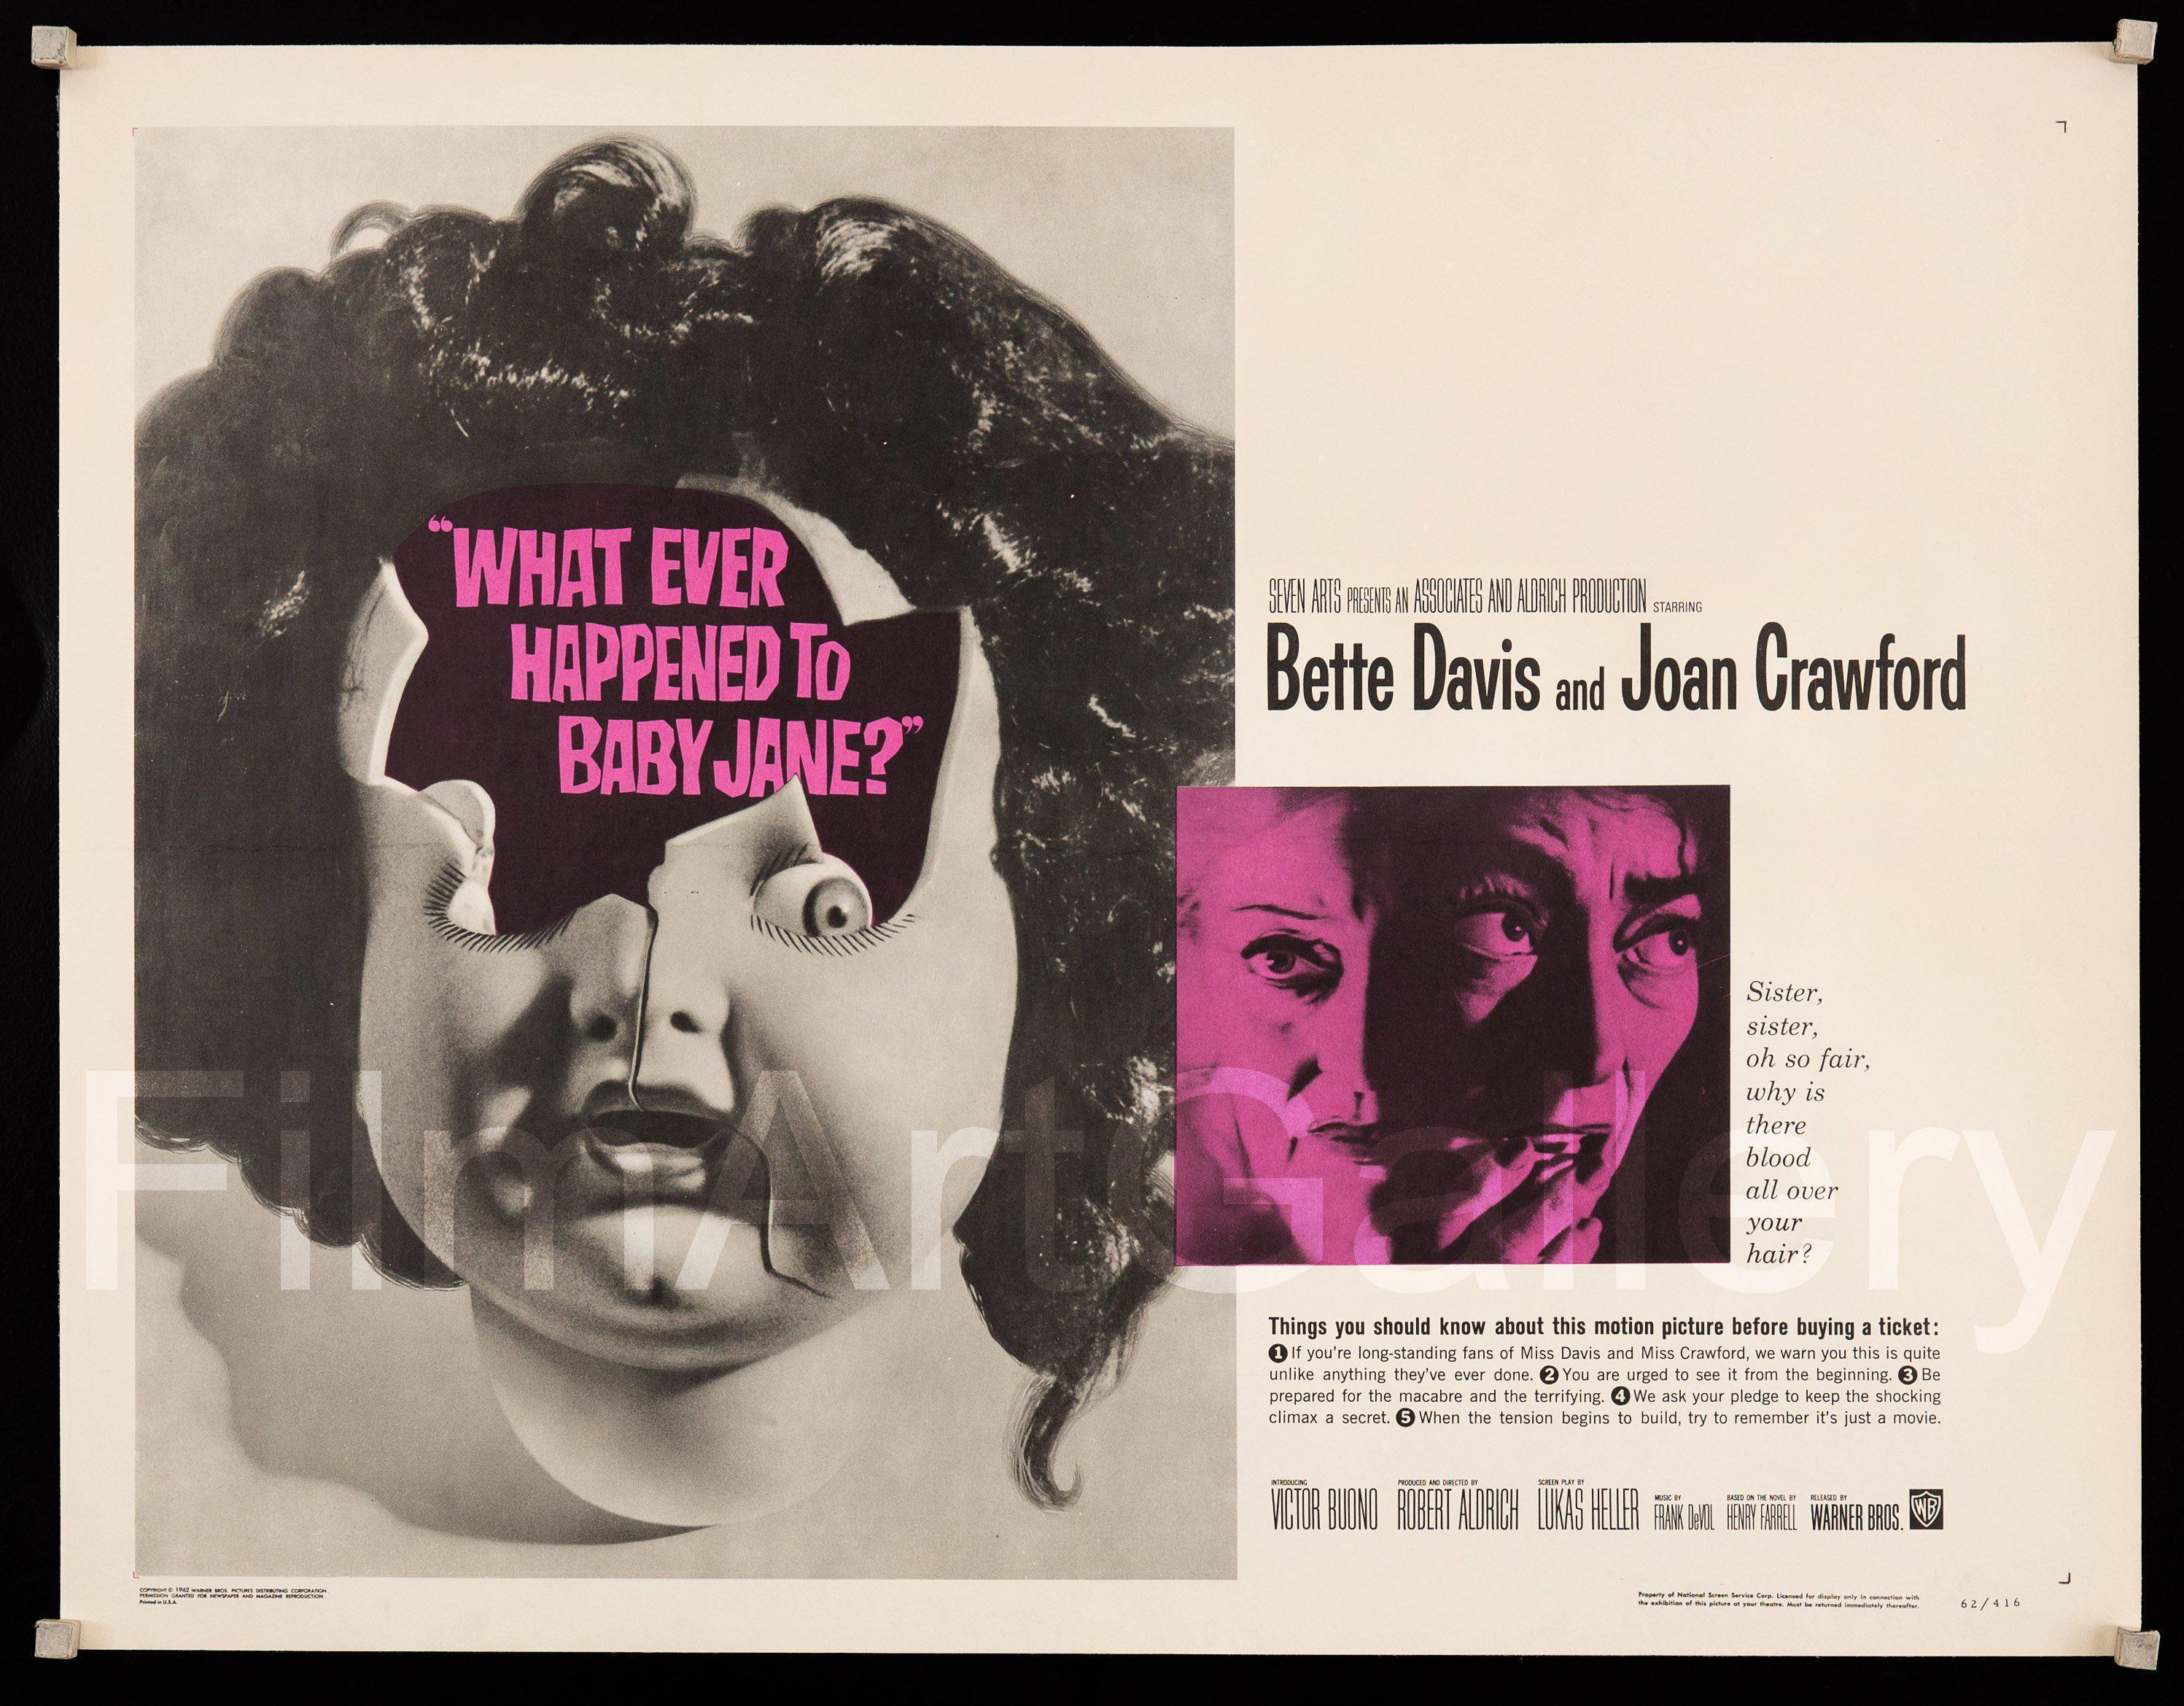 Whatever Happened to Baby Jane? by Henry Farrell